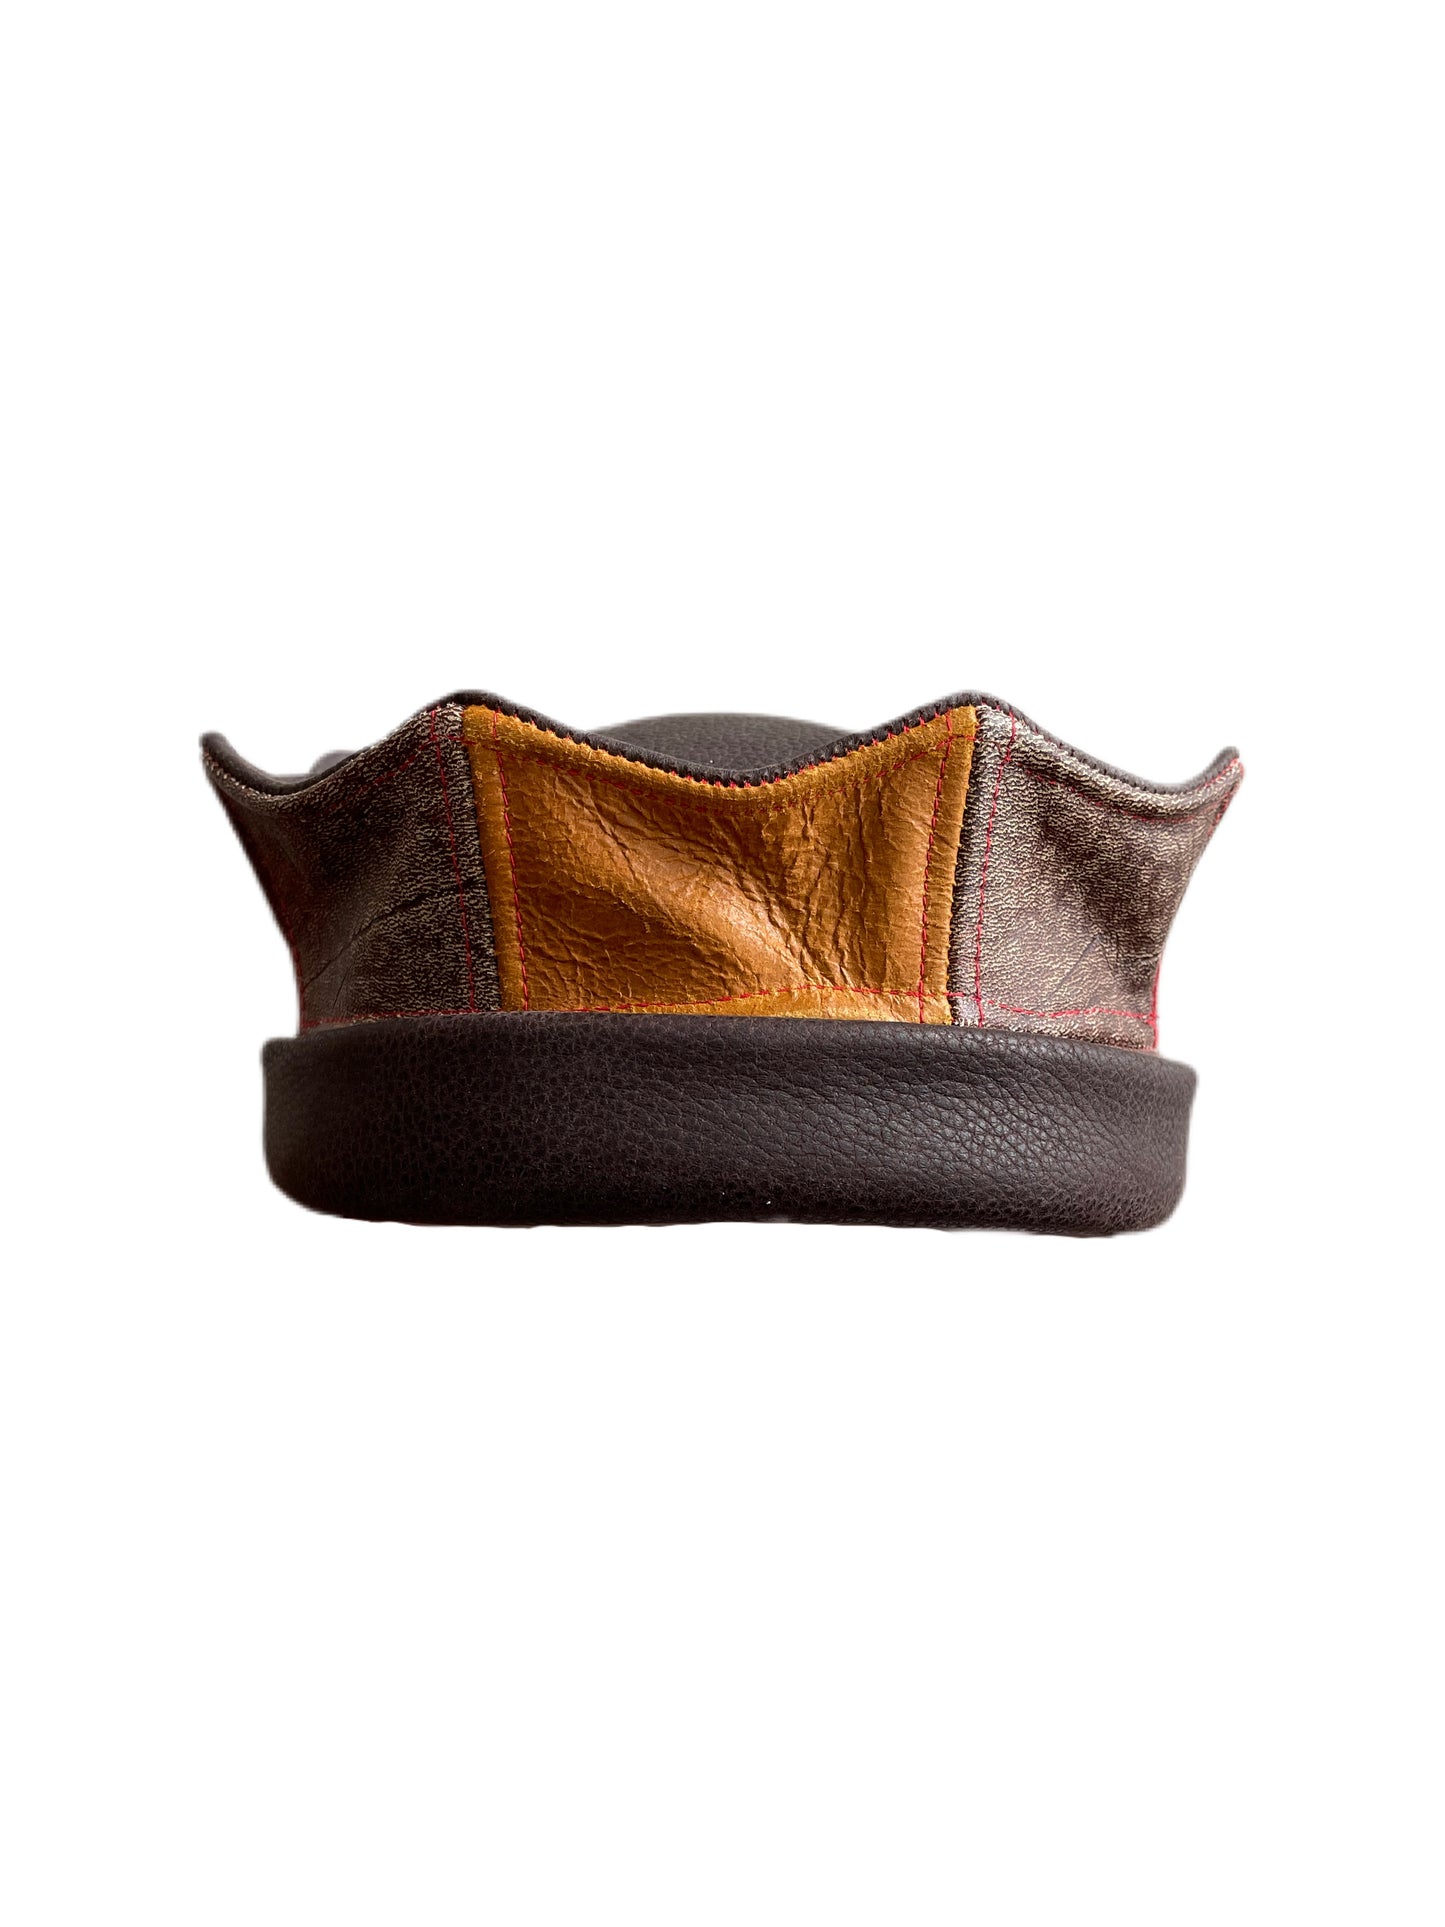 R3 CrewCrown [Leather Lenny]